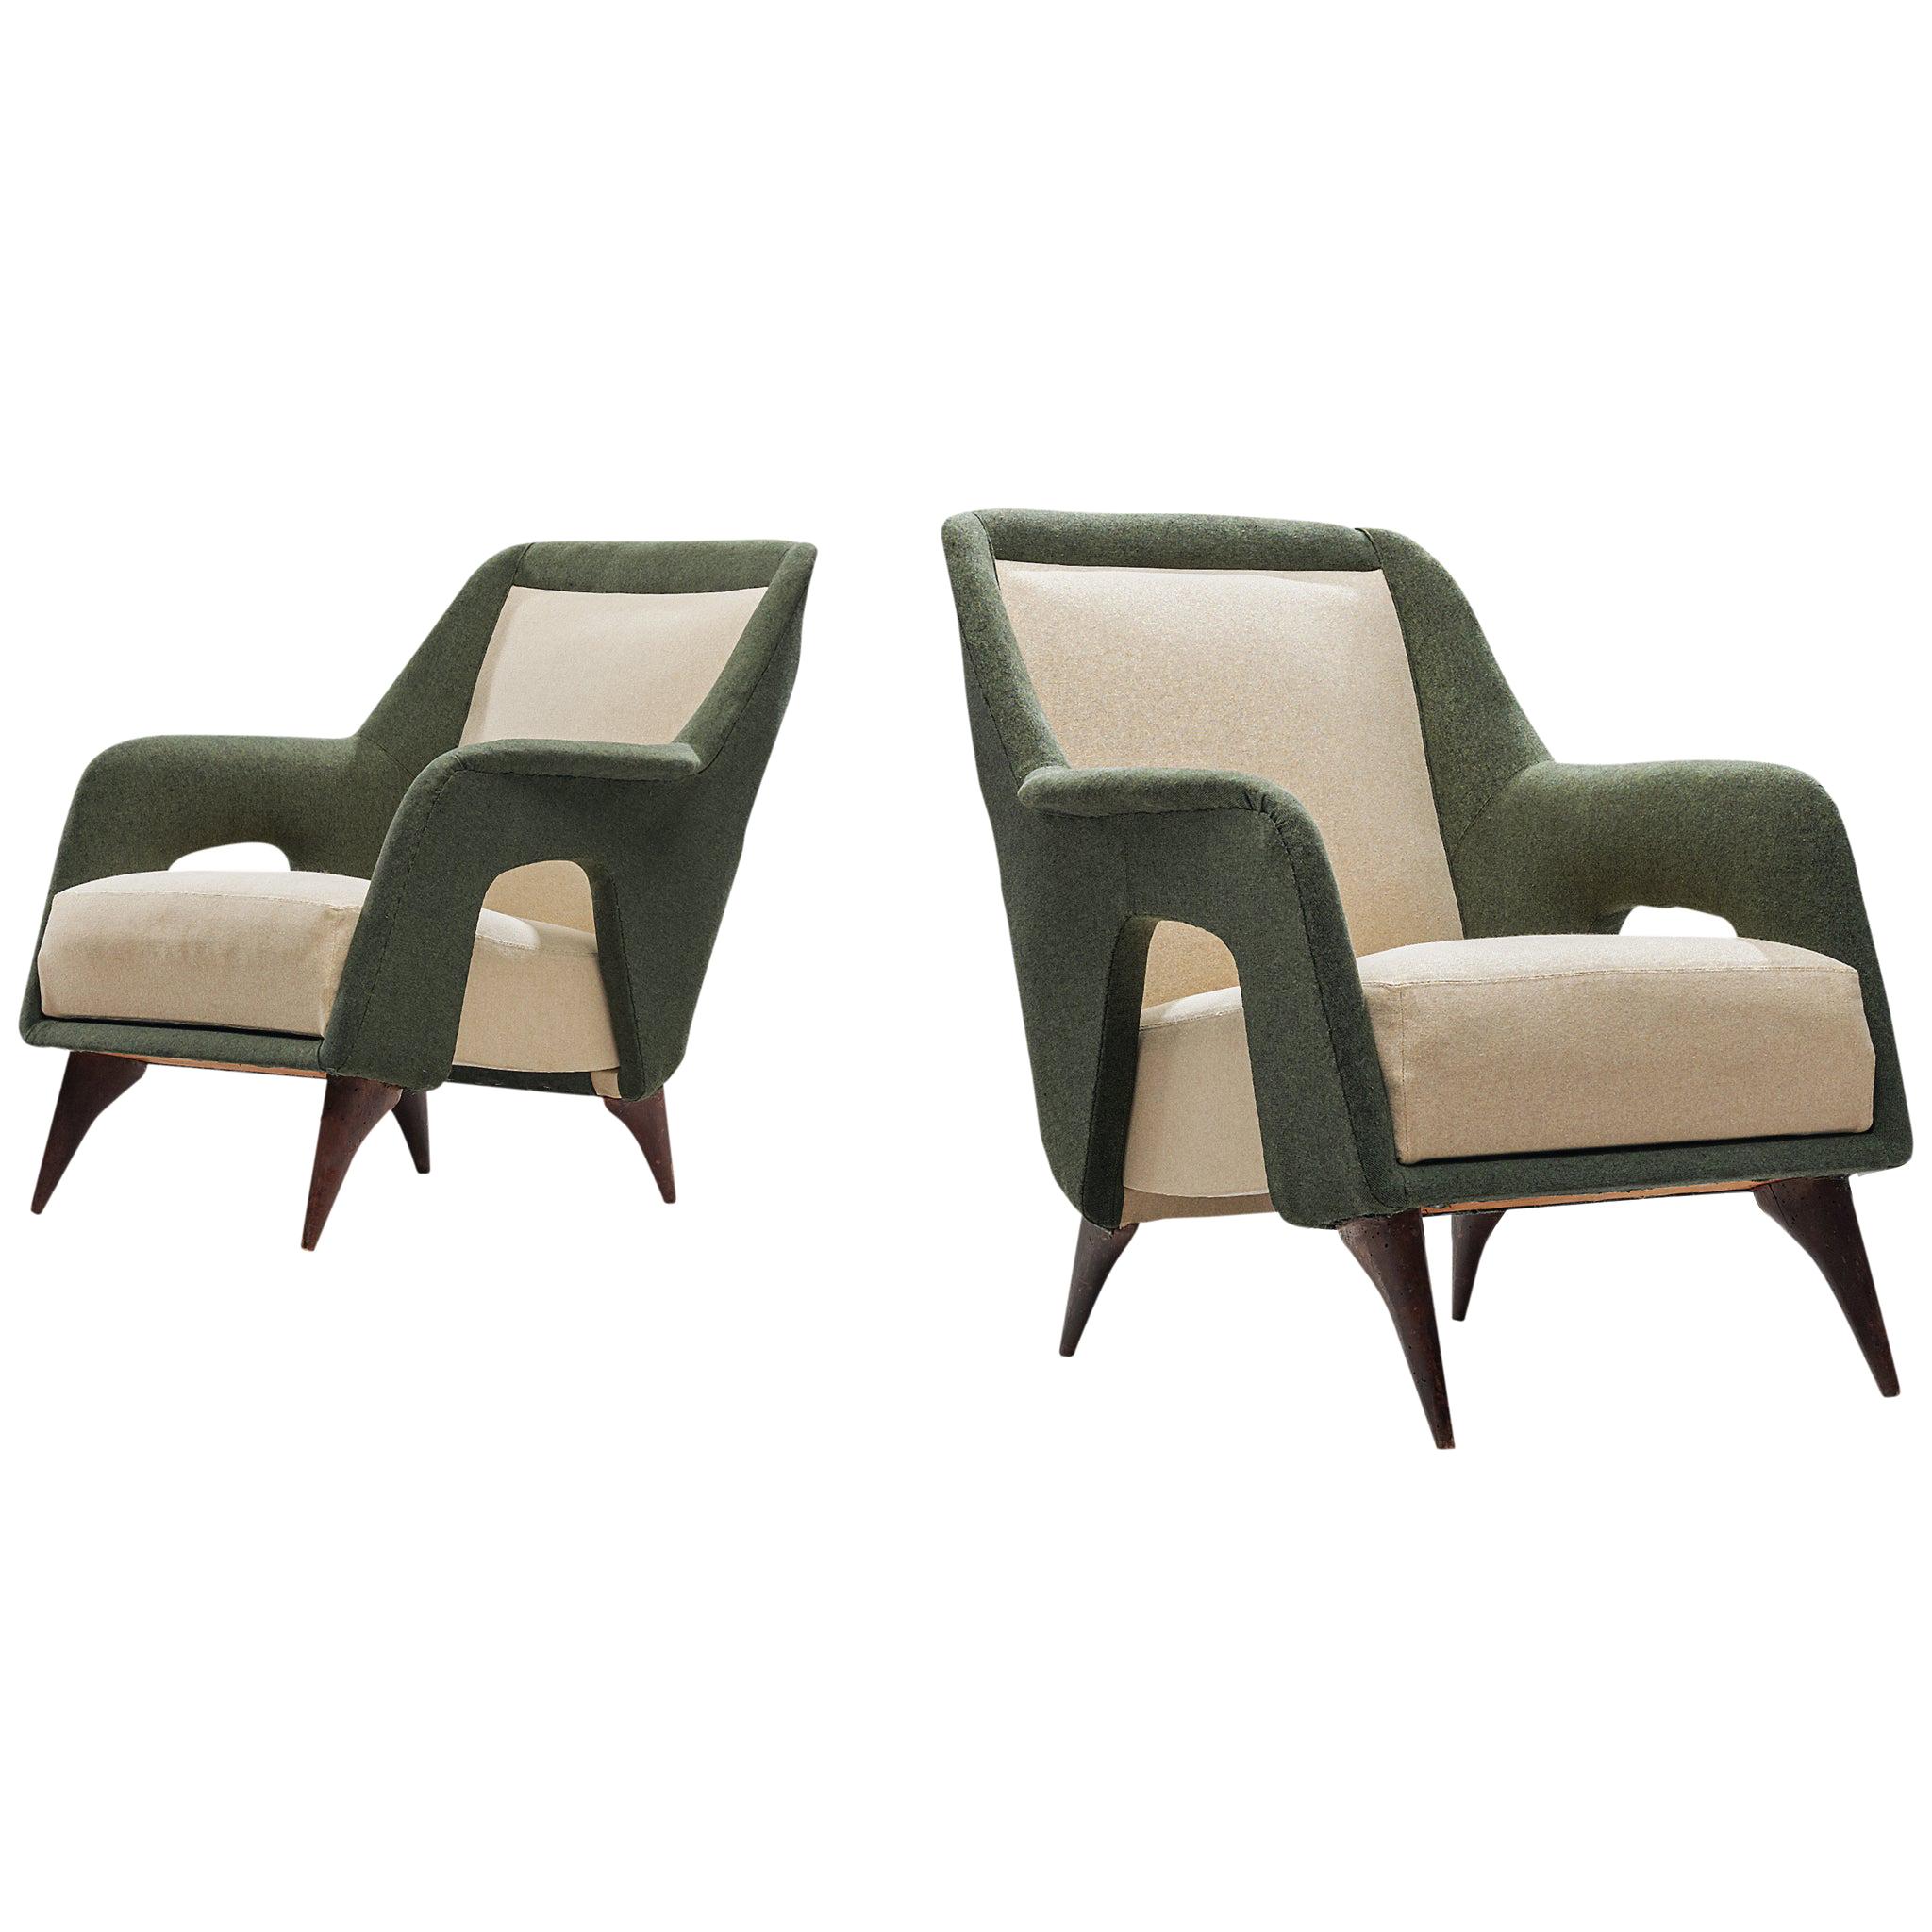 Pair of Italian Lounge Chairs in Forrest Green and Off-White Upholstery